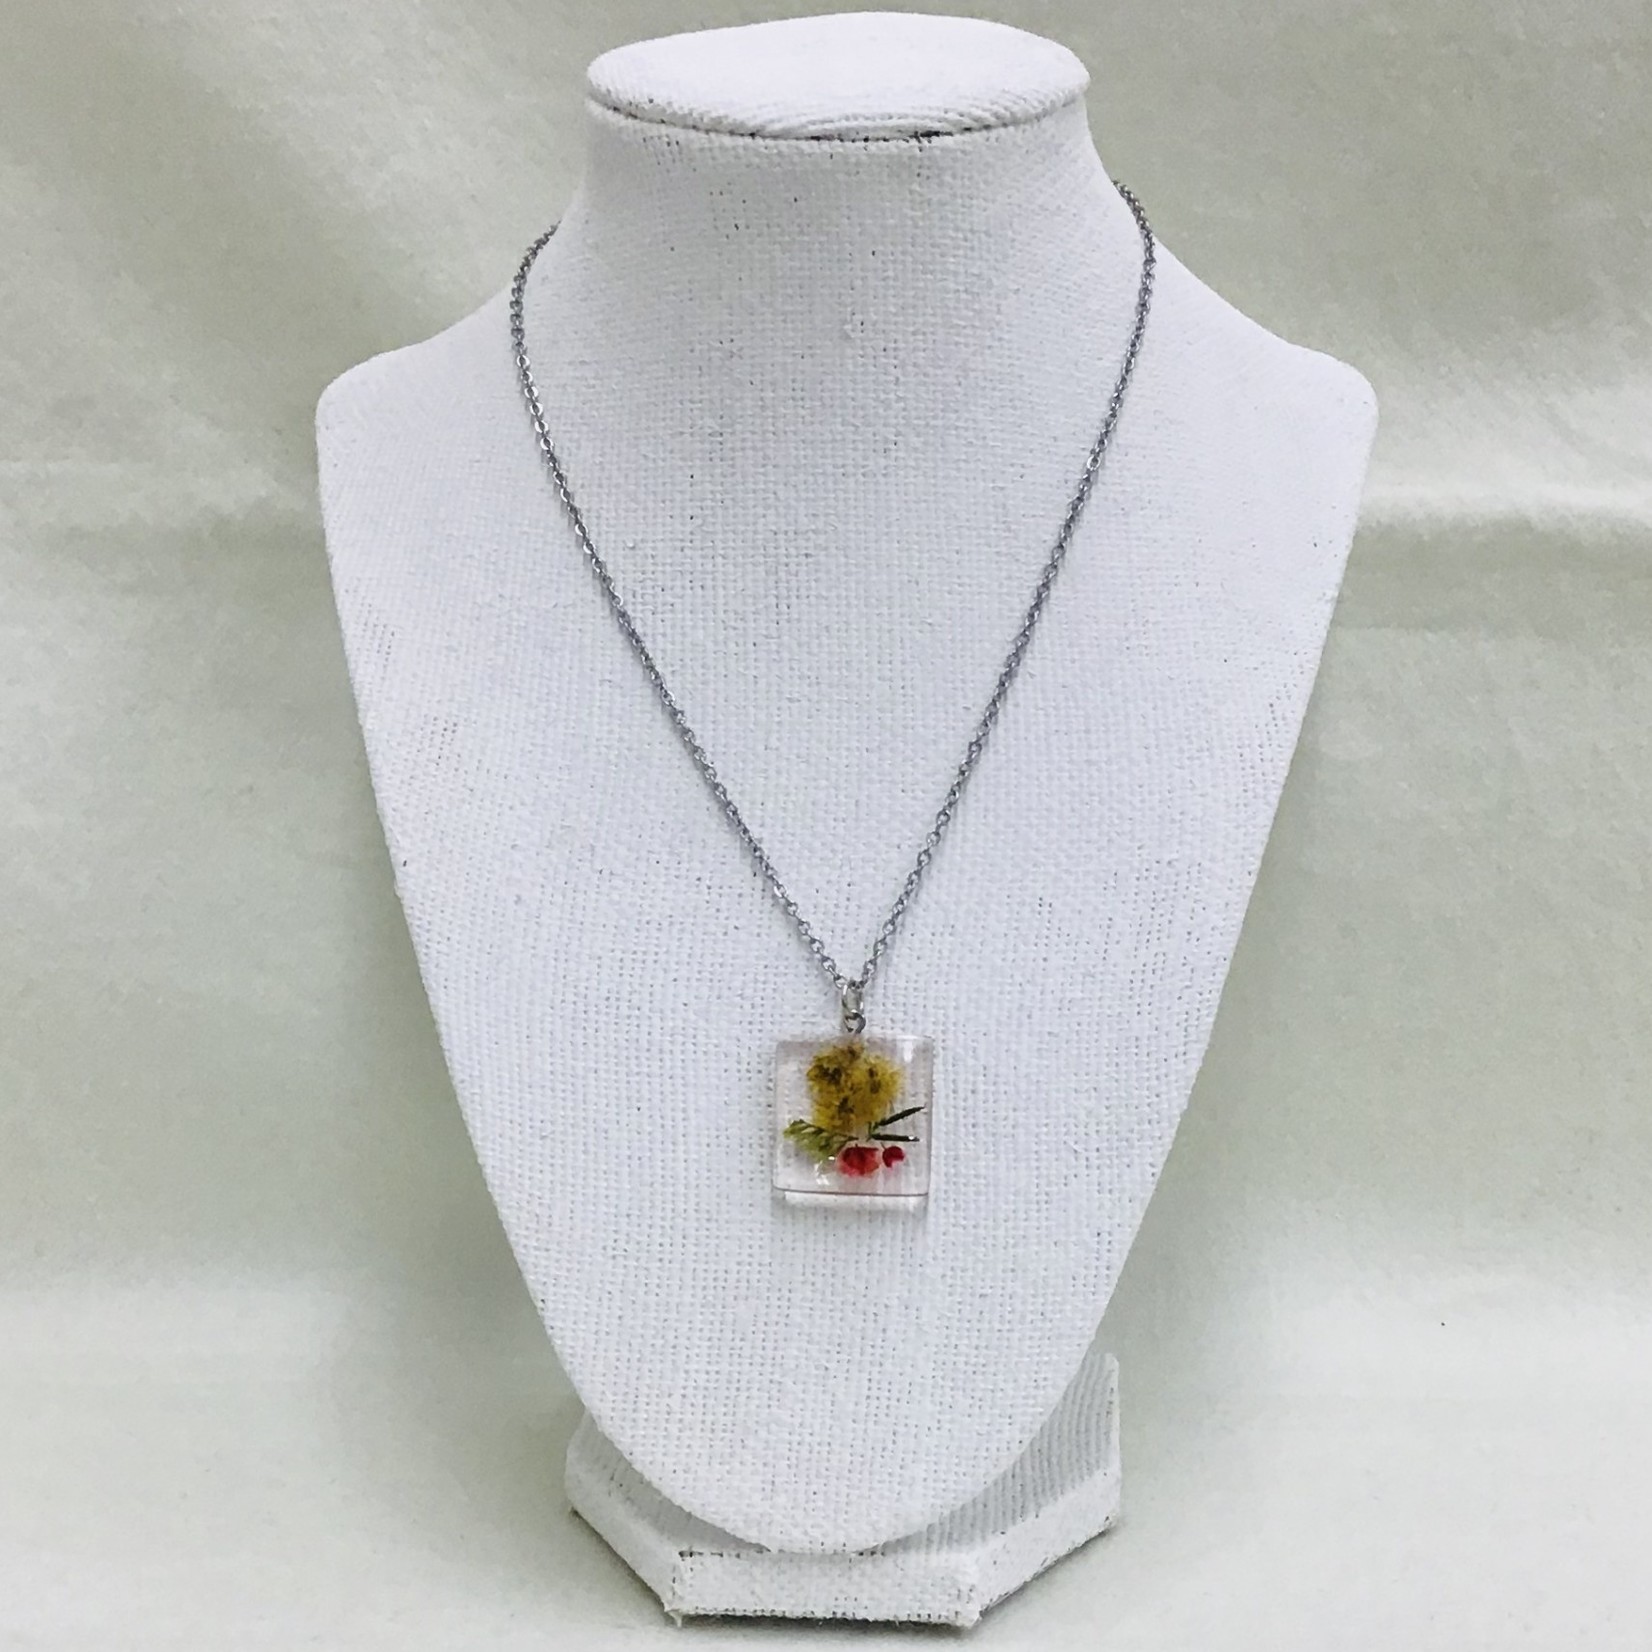 Ten Thousand Villages Square Necklace with Dried Flowers